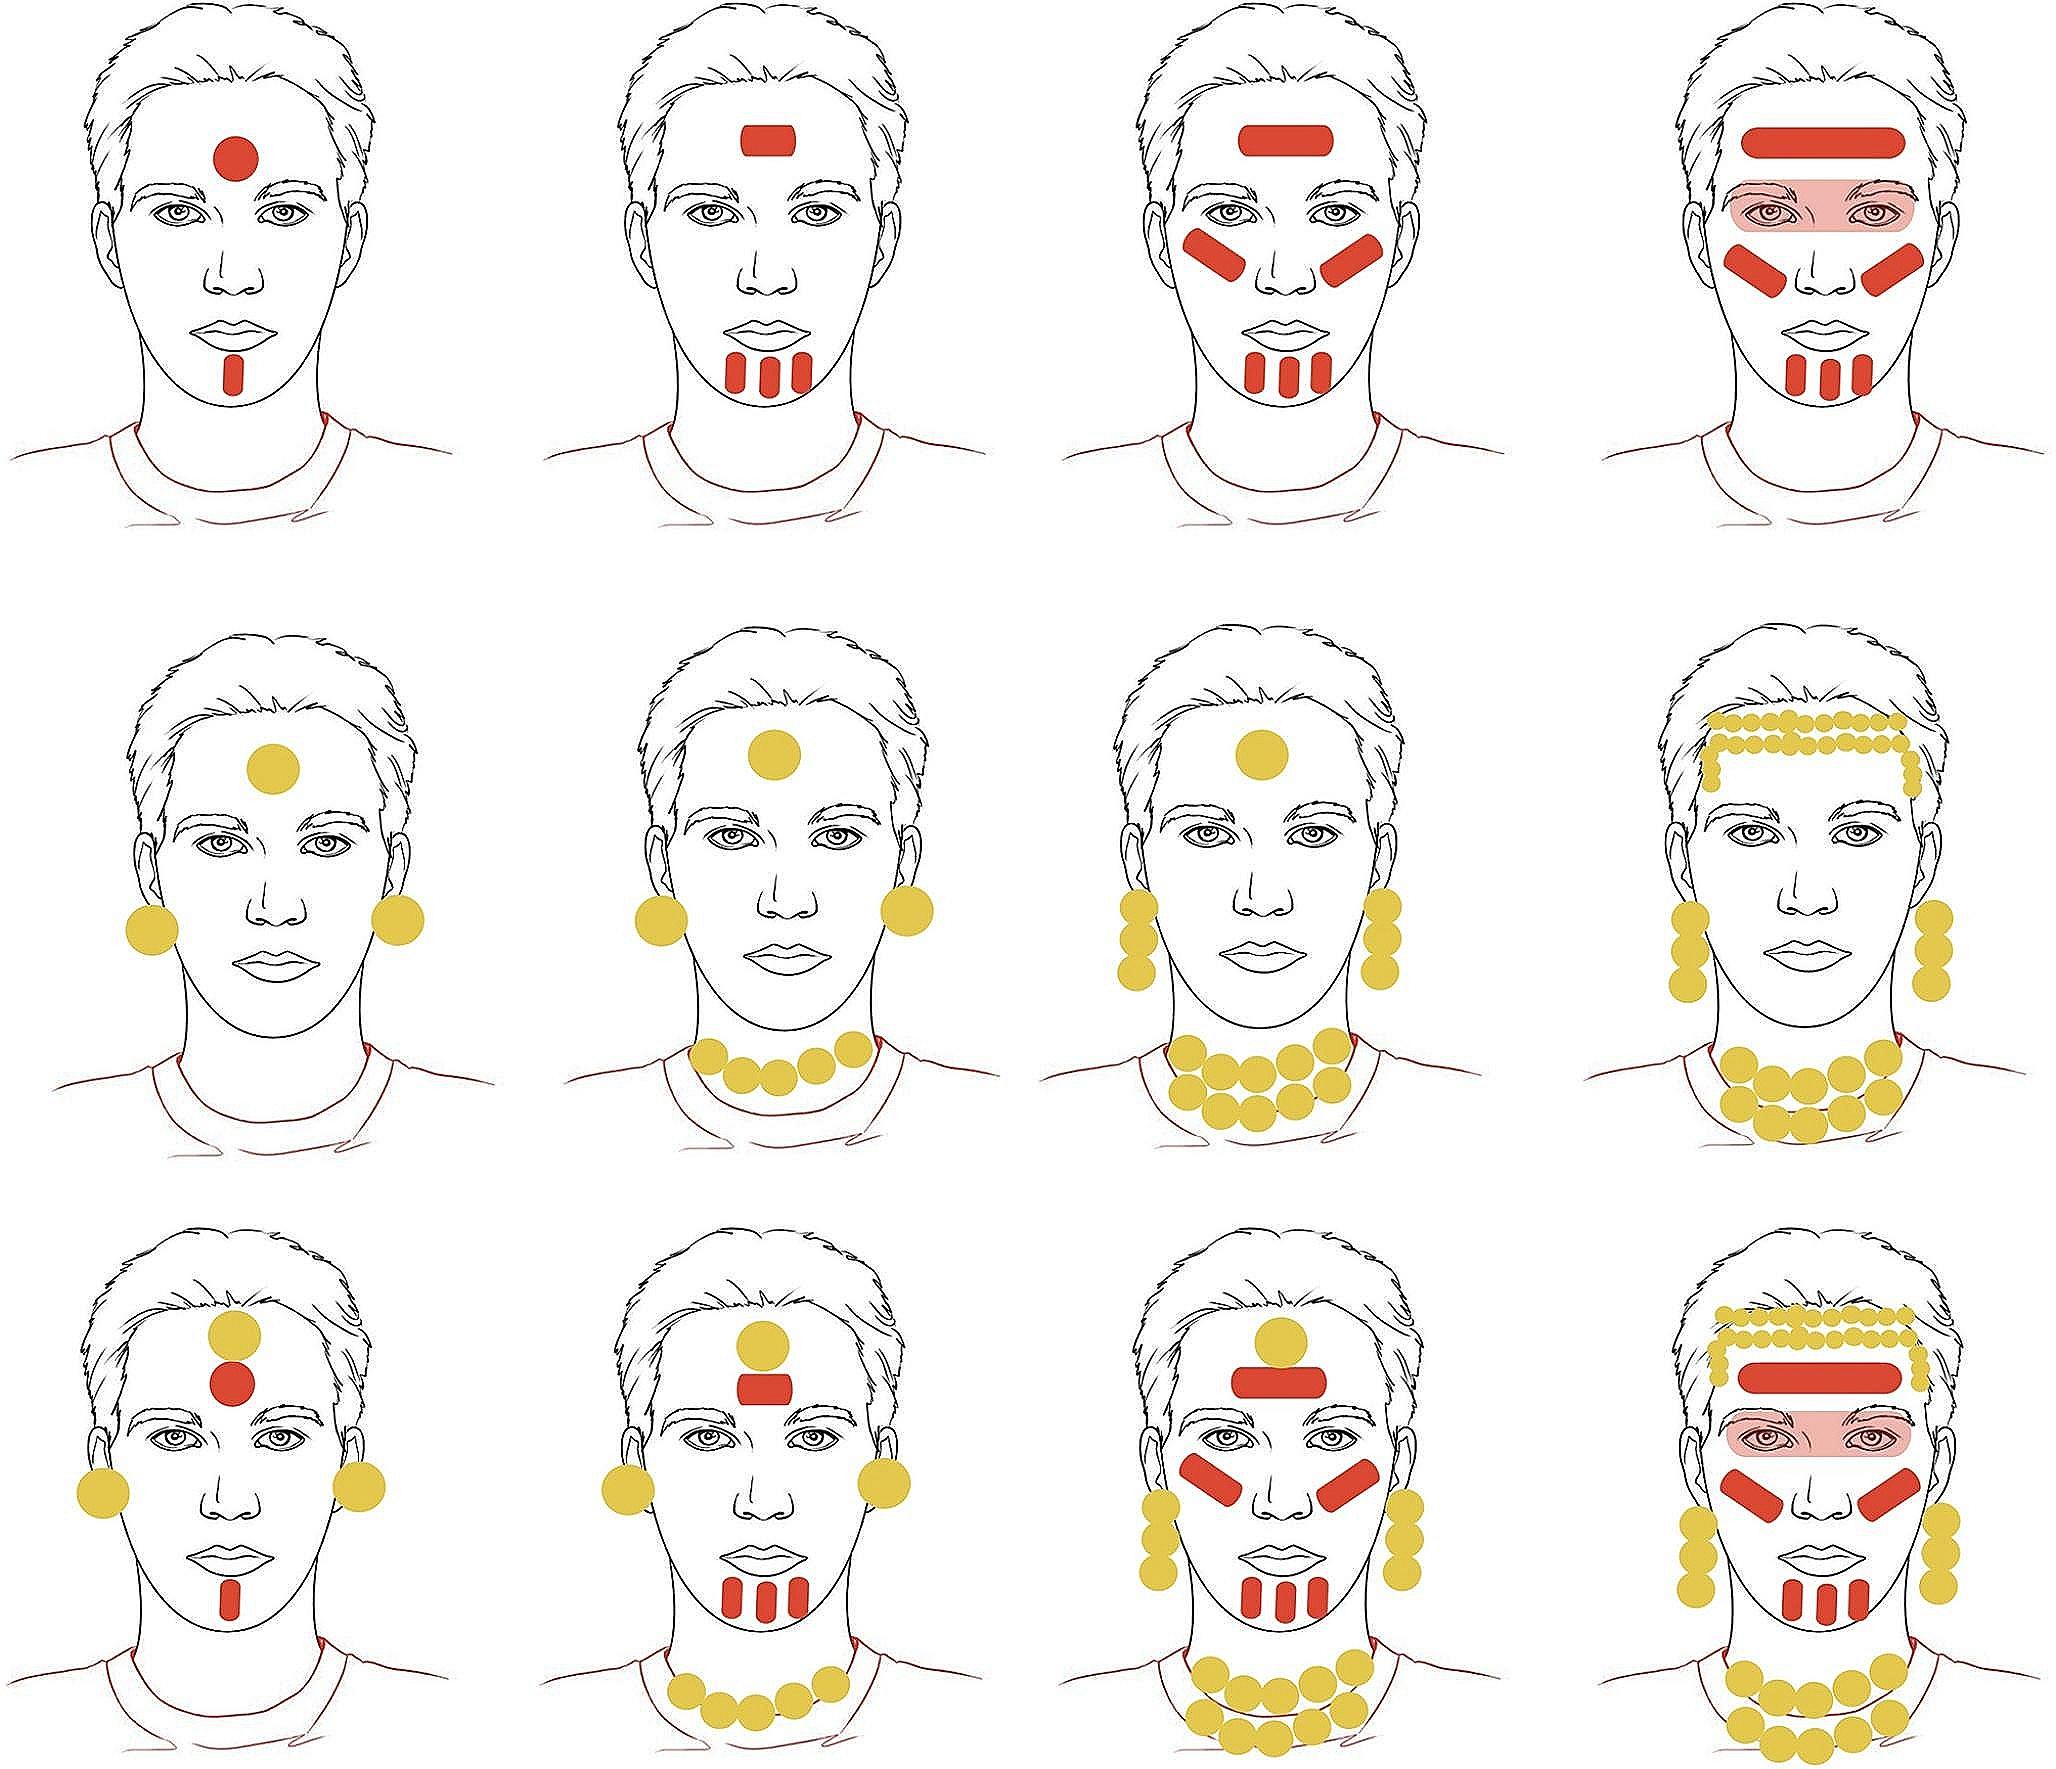 Assigning a social status from face adornments: an fMRI study